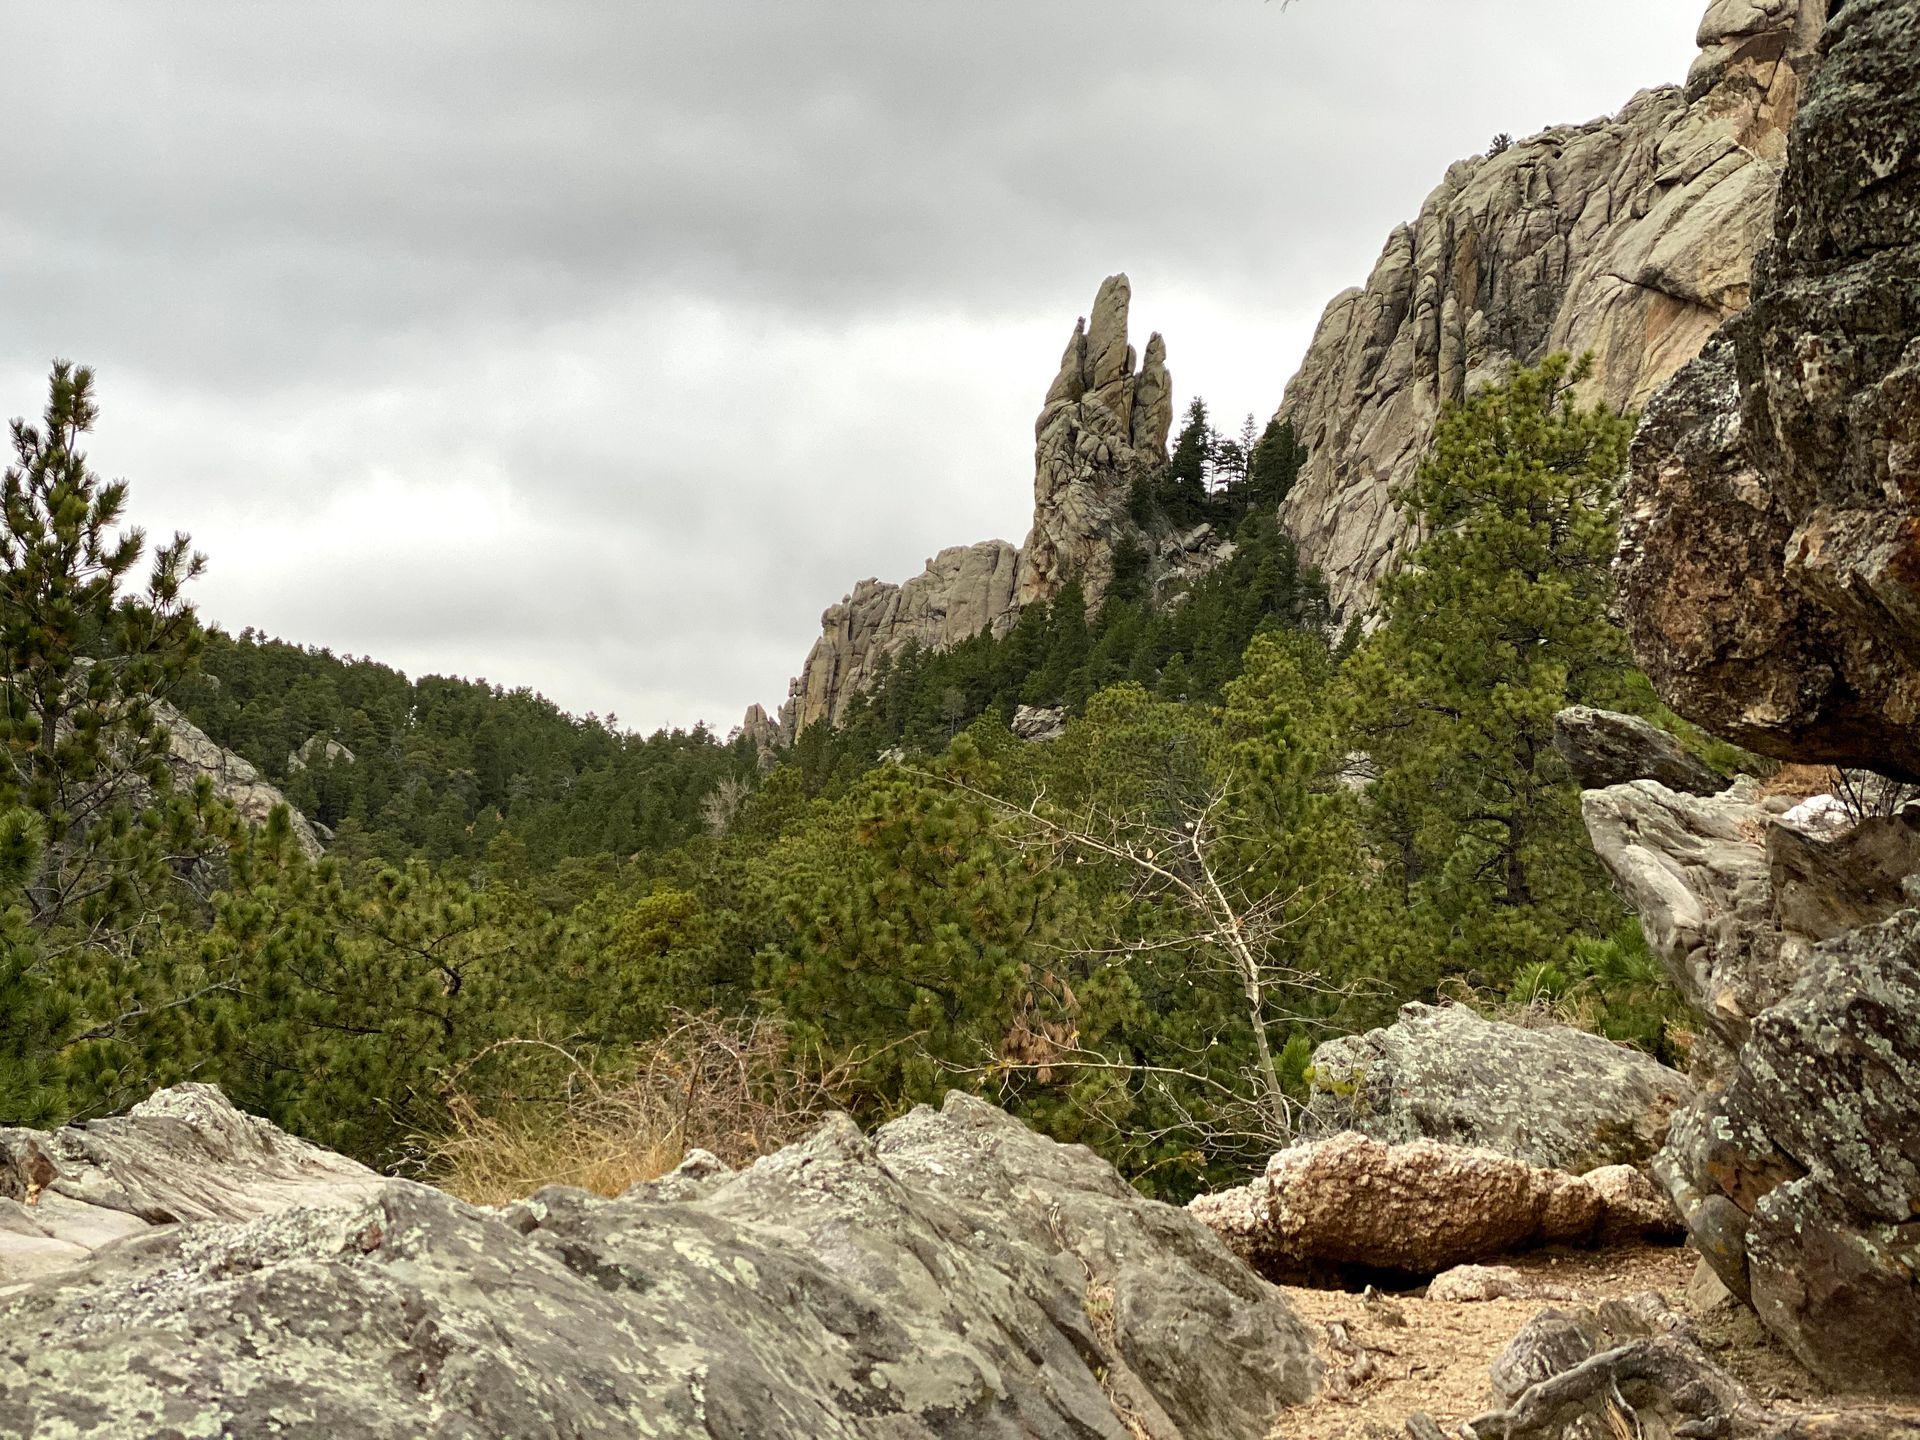 A view of rocks and trees in The Black Hills.